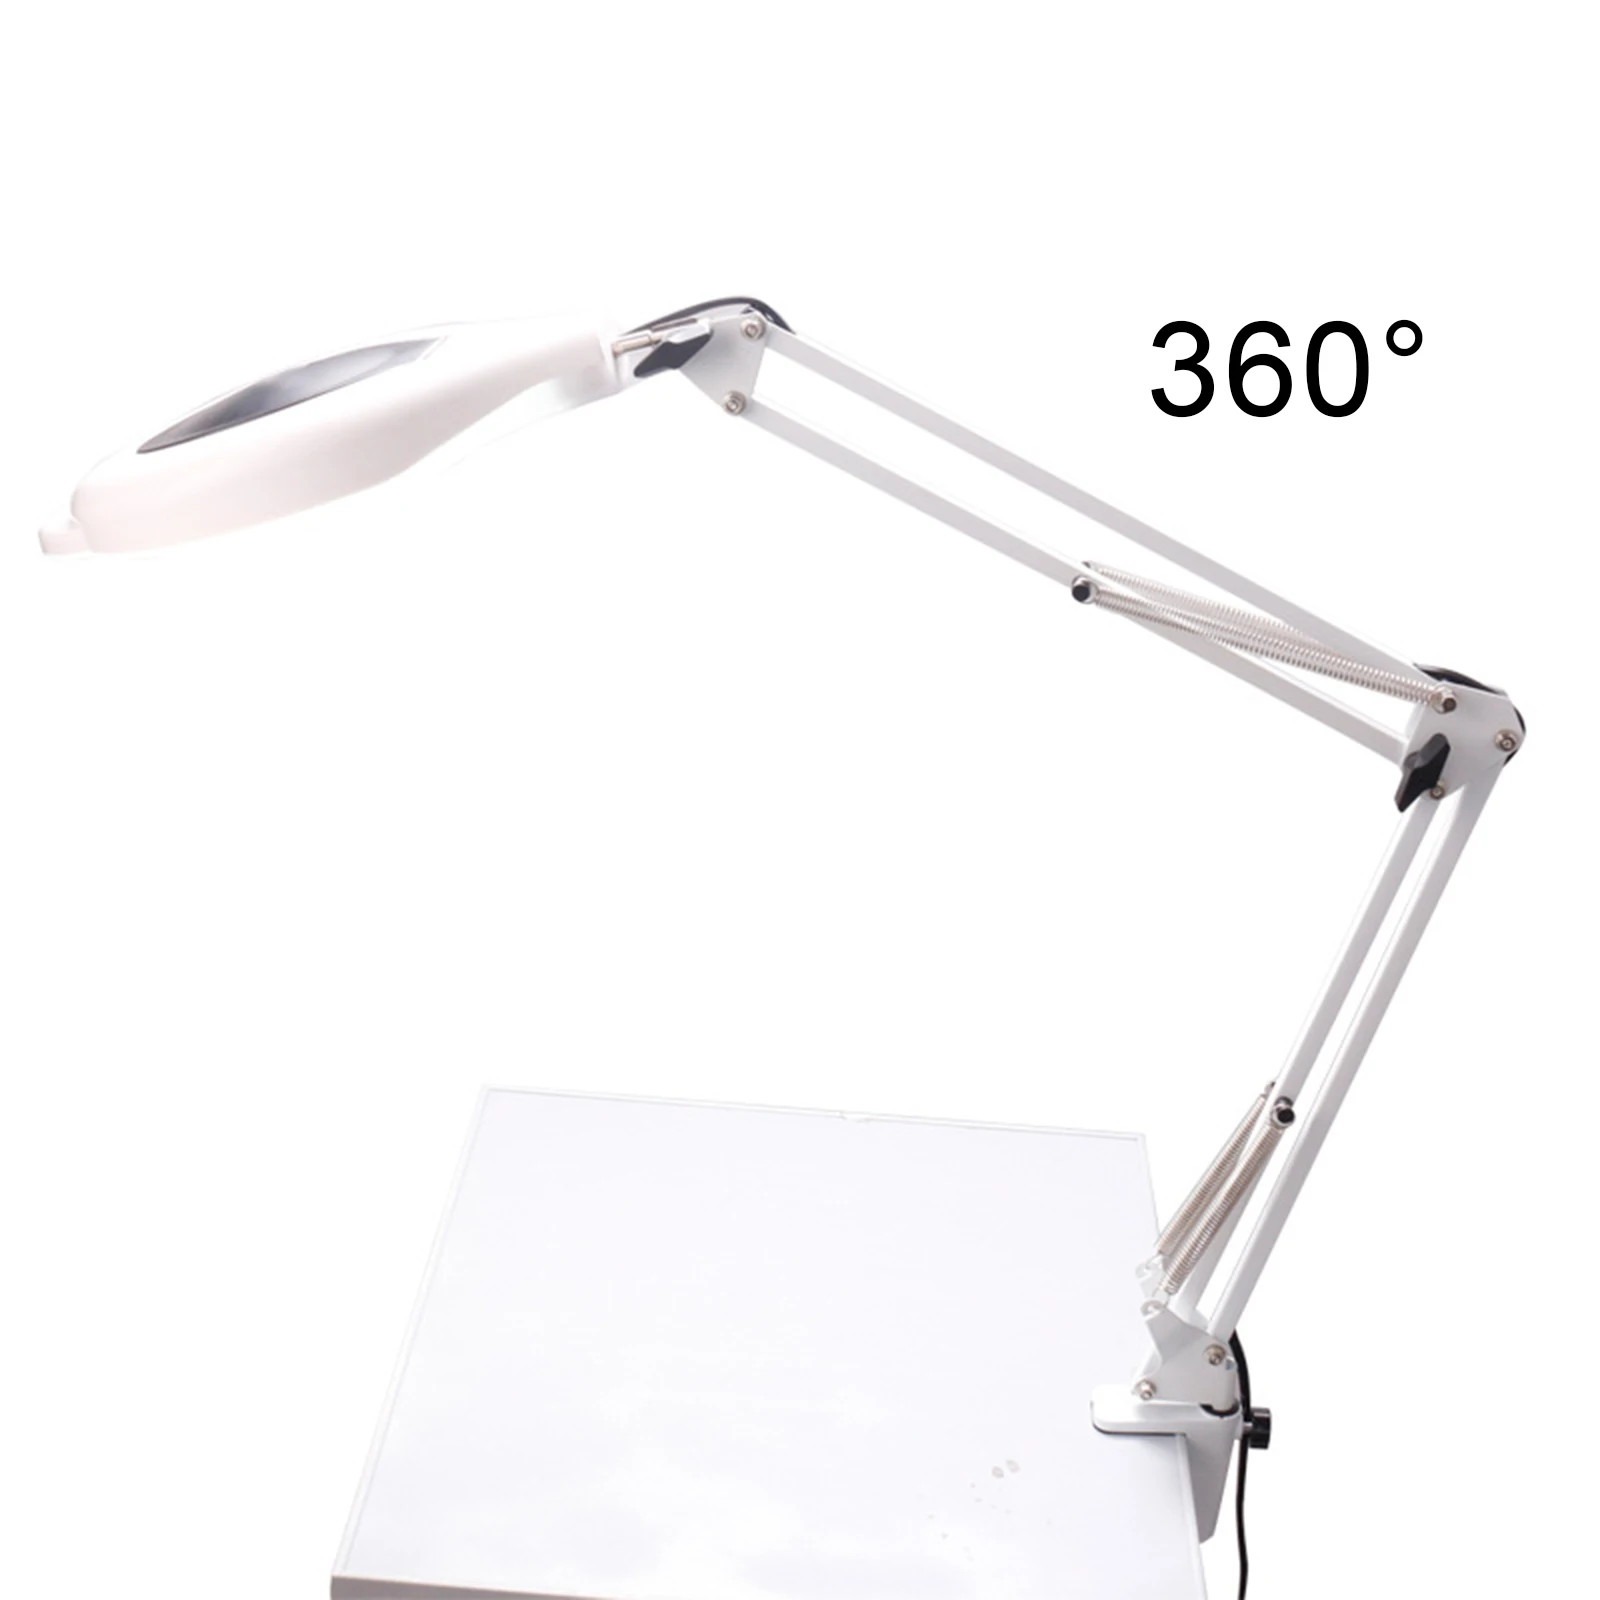 Folding USB Magnifying Lamp Magnifier Table Light with Clamp, 6,000k Cool White Led Technology